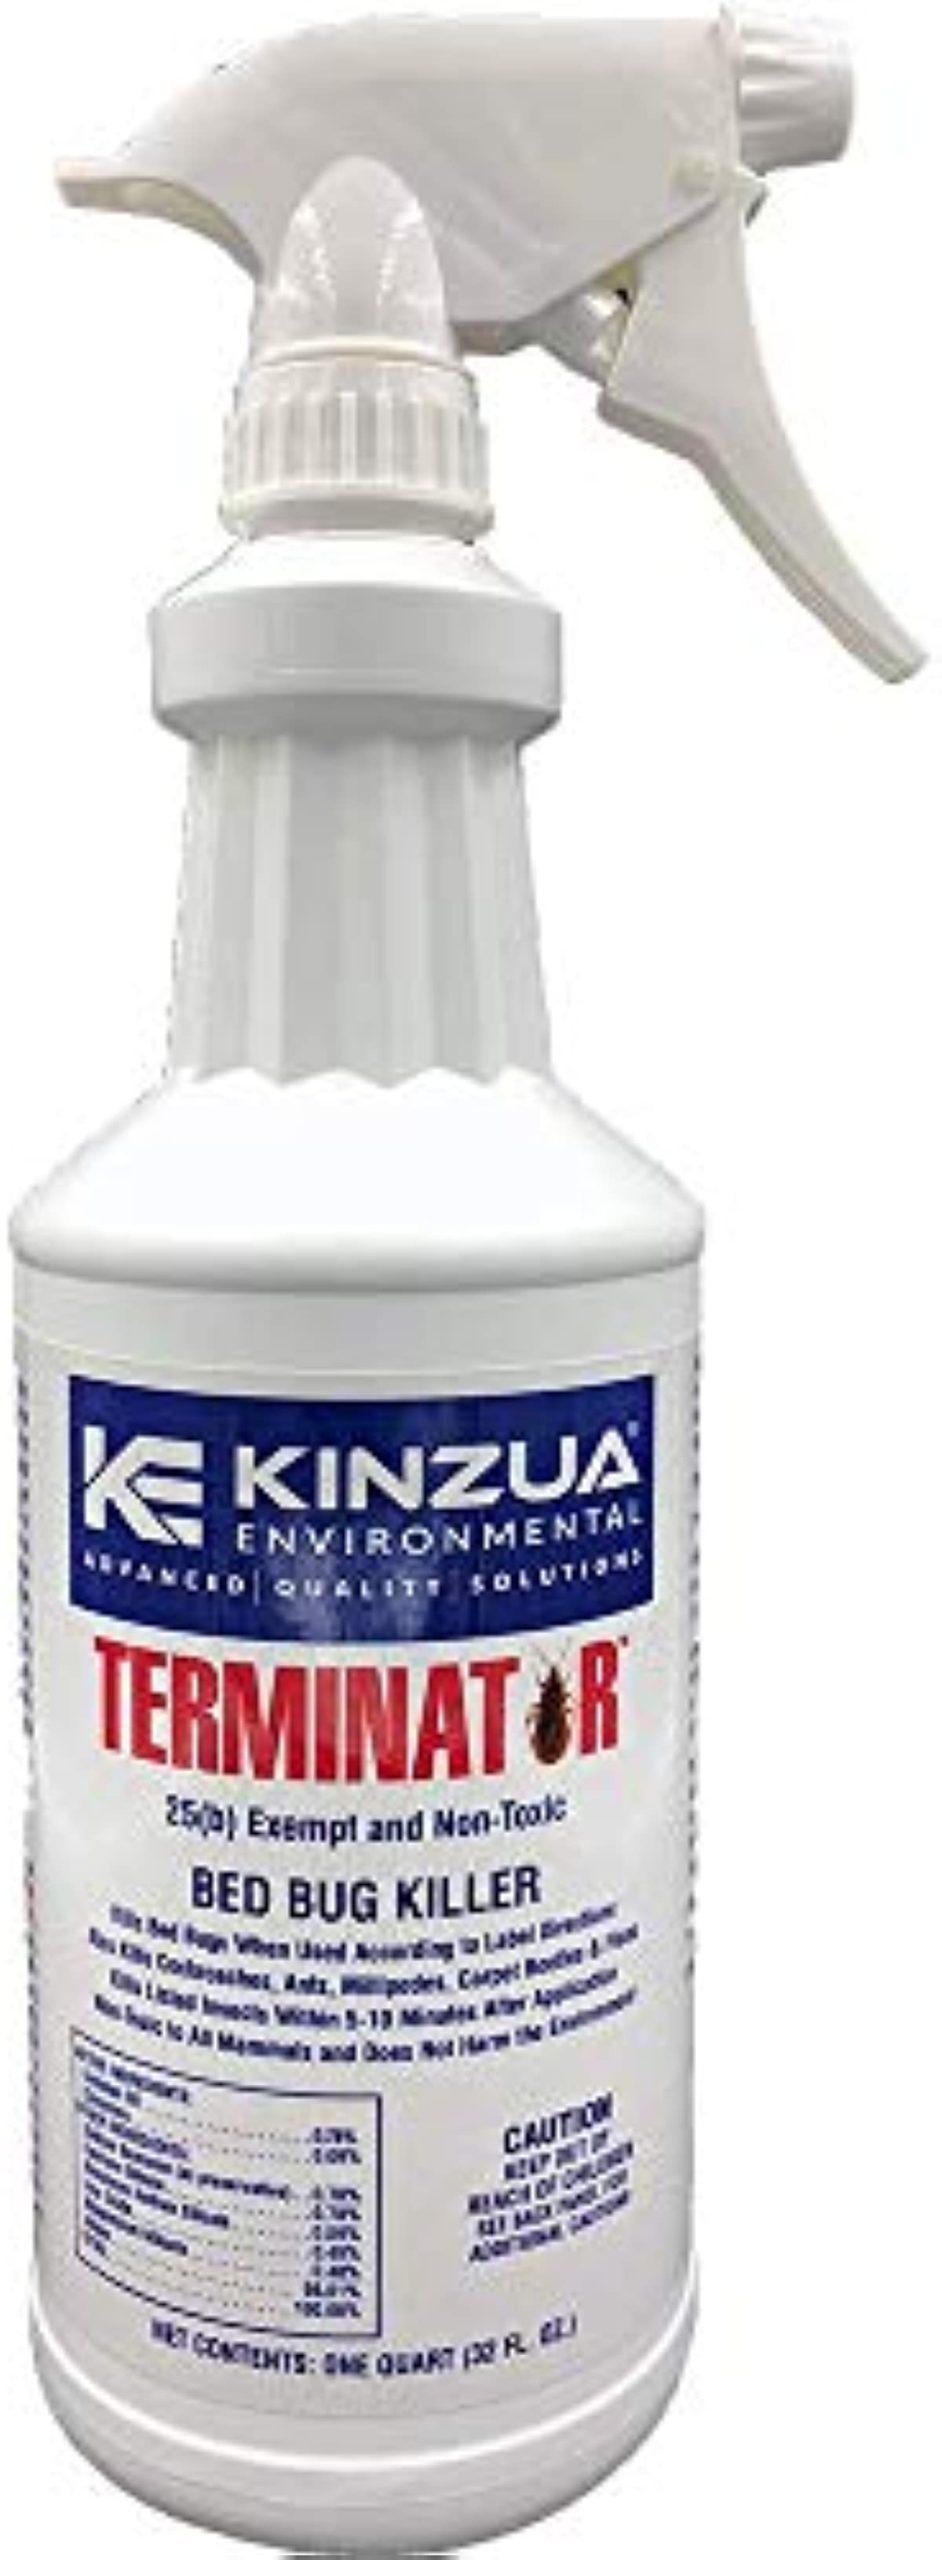 Terminator (32 oz) | Bed Bug, Ant, Flea & Cockroach Killer | All Natural, Non-Toxic, Child & Pet Friendly, 100{1ed92ee85cf7b964fd6d75d559e4a8450a56a2198d75baad4398af760c92c4ff} Effective, Fast Acting, Stain & Odor Free, Extended Protection 30 Days (32 oz)